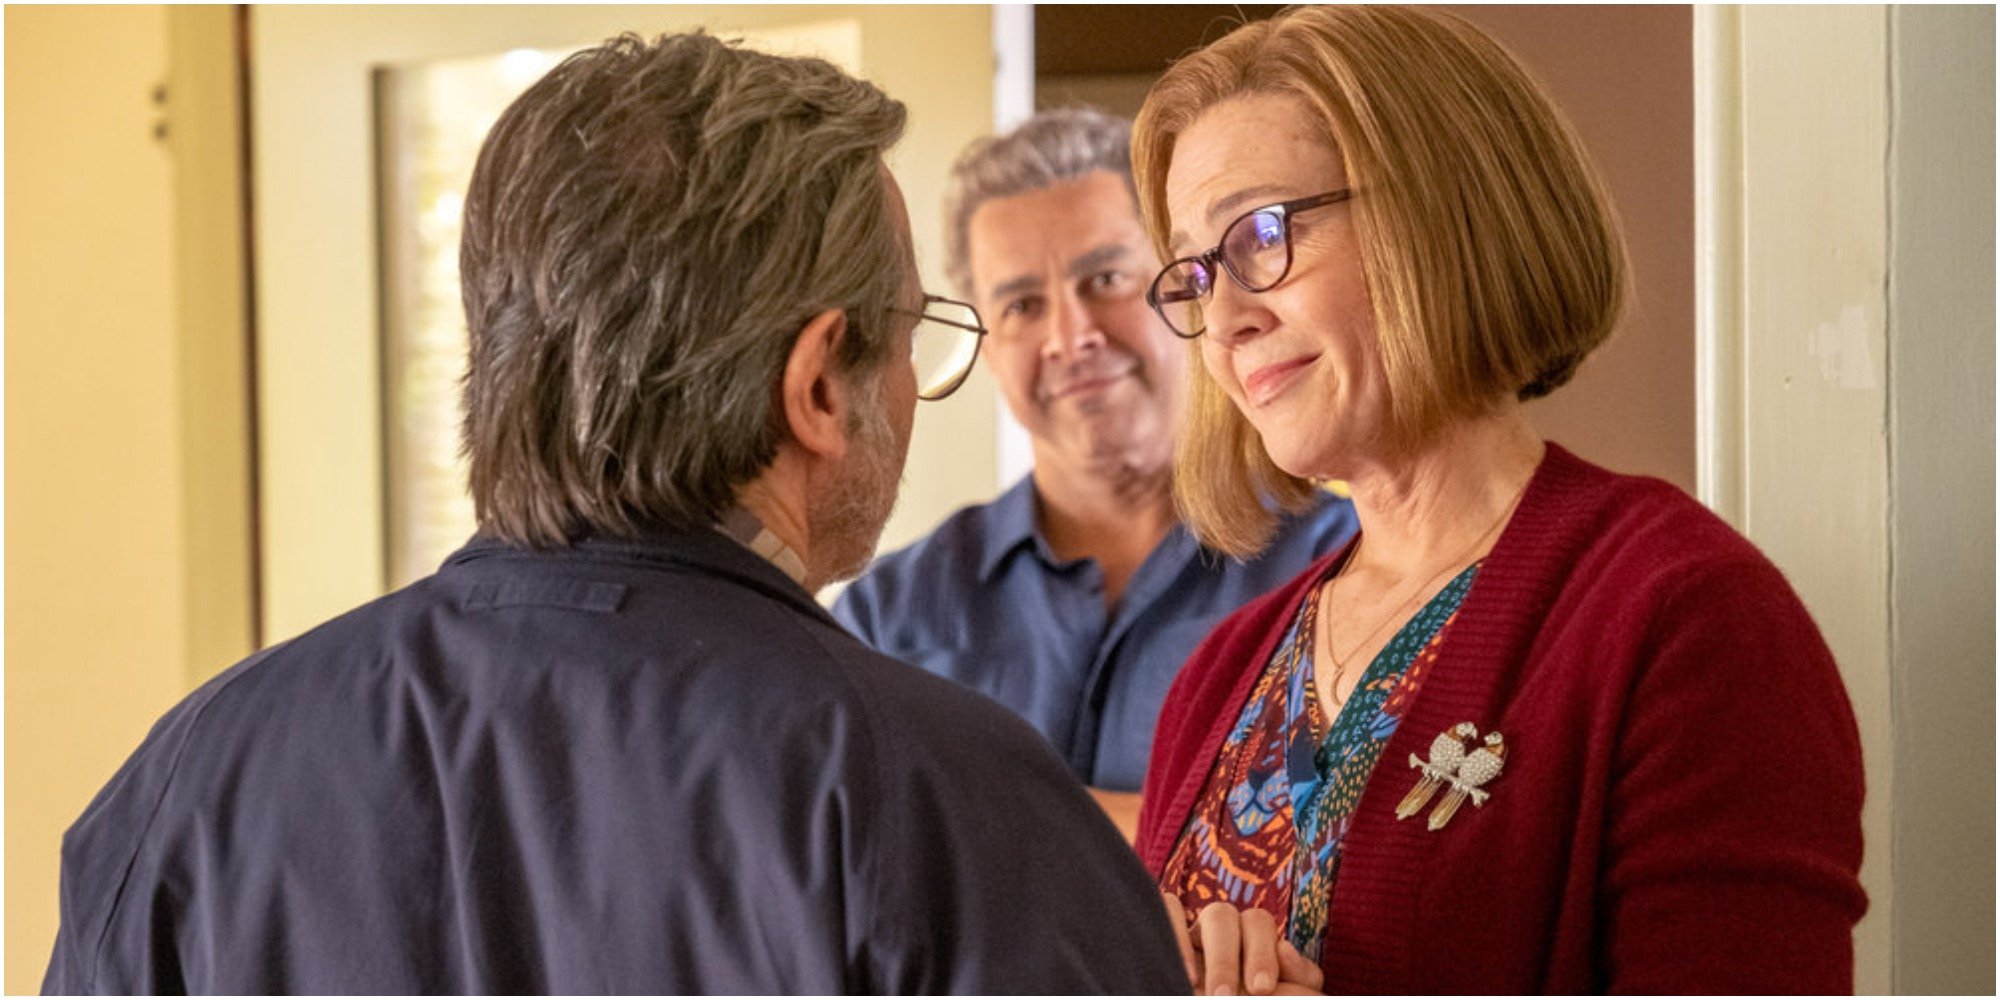 Griffin Dunne, Mandy Moore and Jon Huertas on the set of This Is Us.